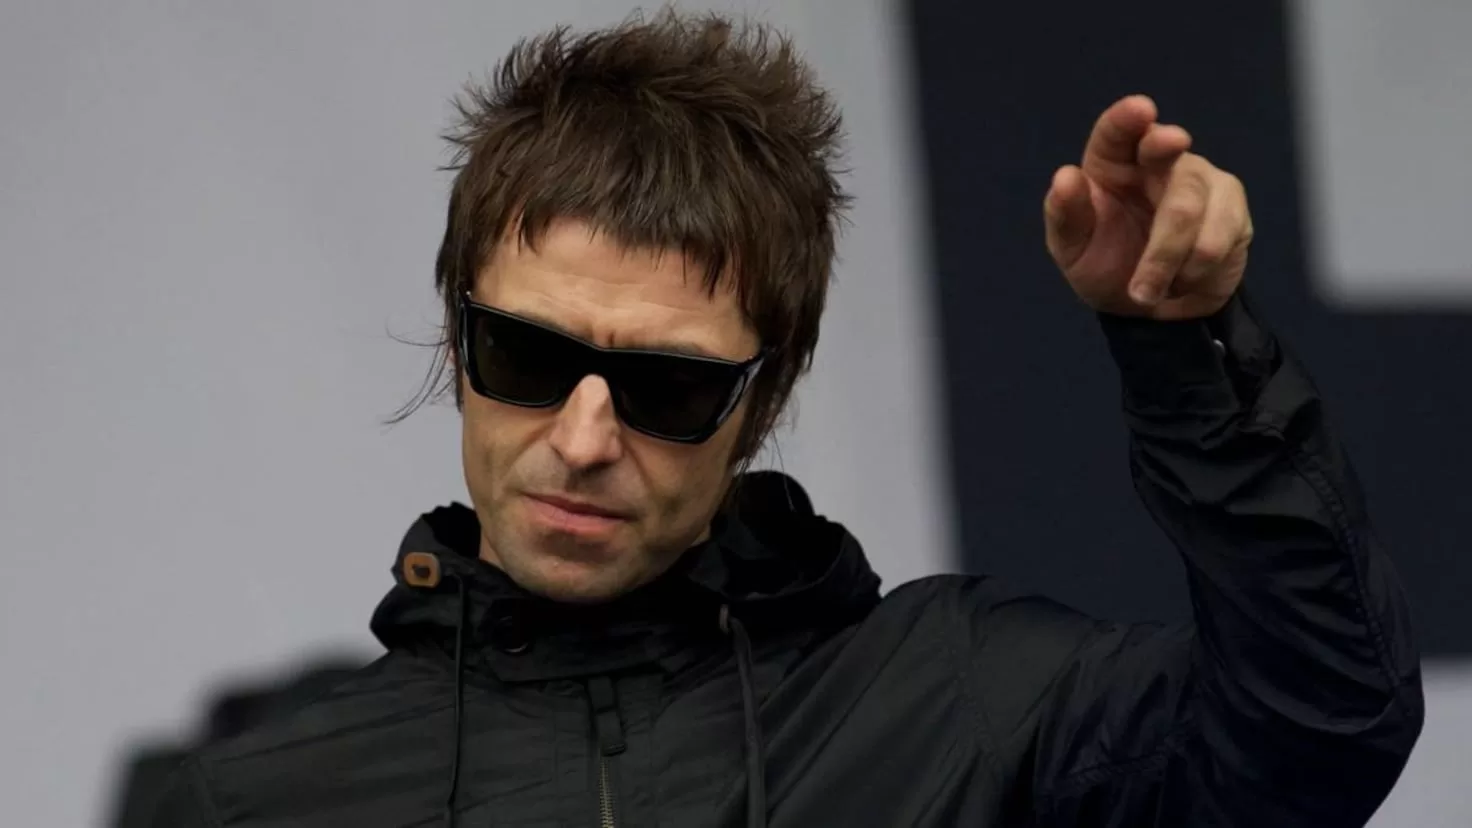 Liam Gallagher's health problems at 51: I'm going downhill
